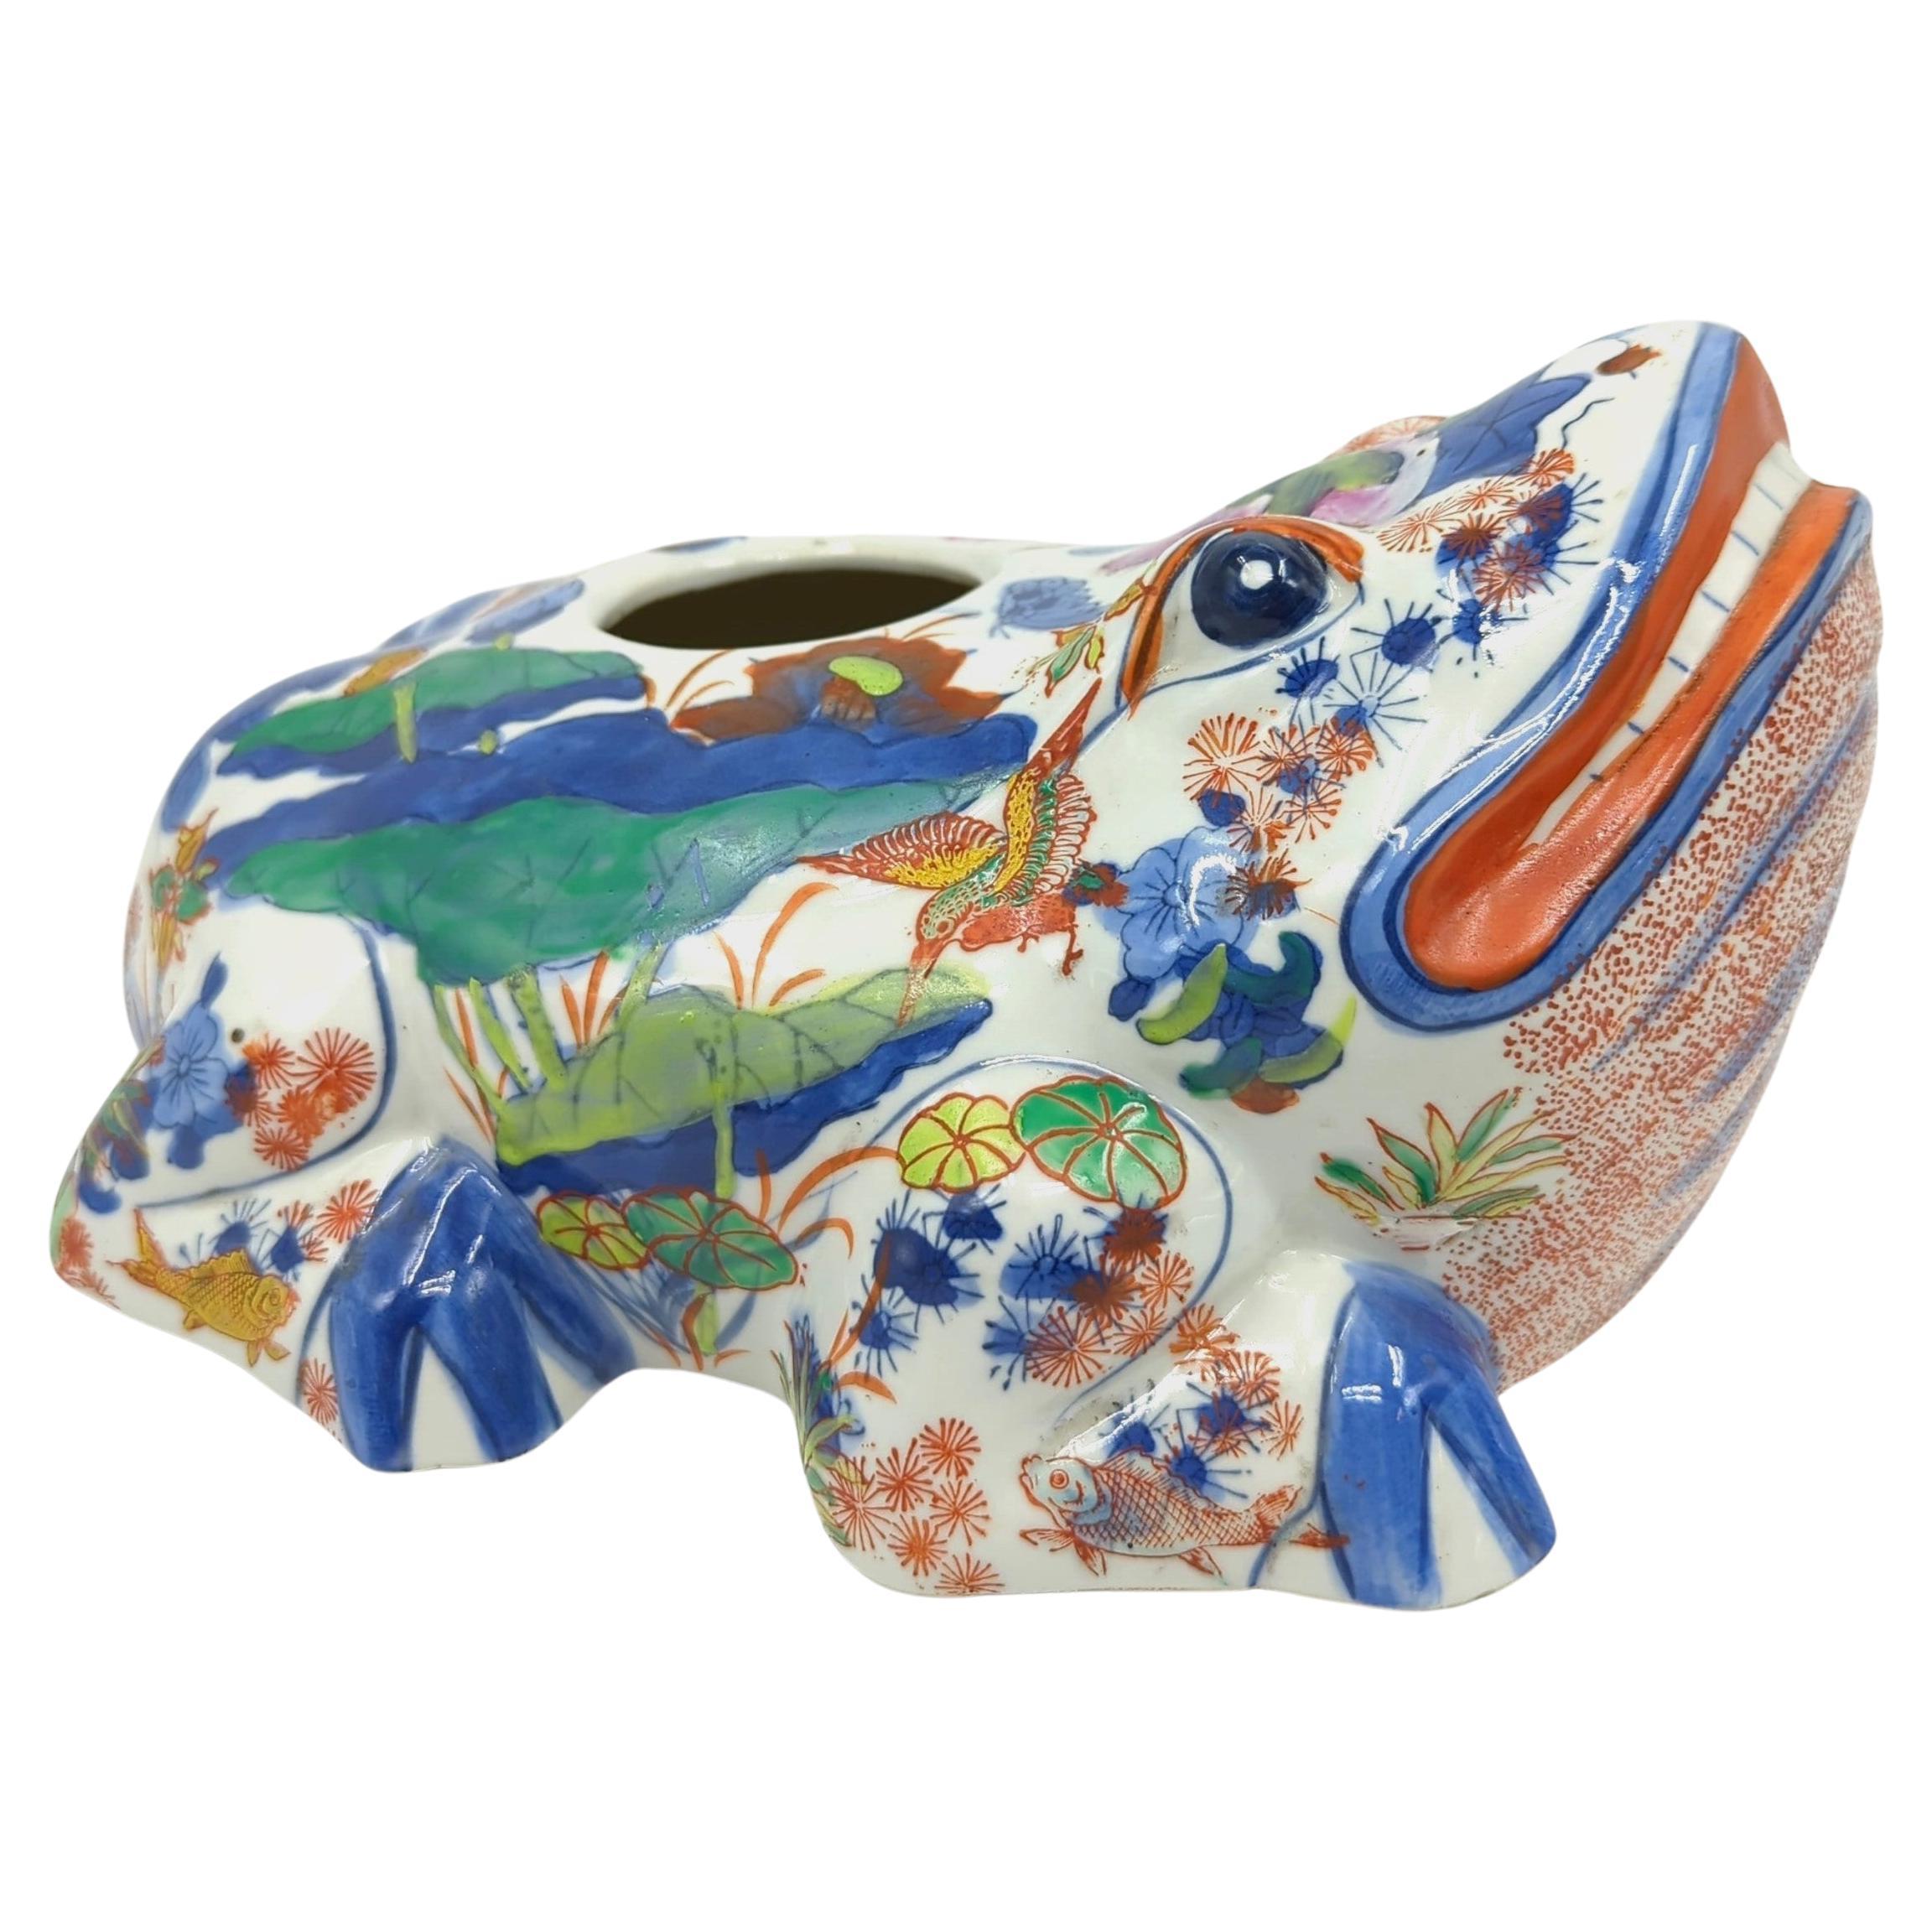 We are pleased to present this large, polychrome doucai-decorated frog vase, a remarkable piece from the late Qing dynasty. The vase is colourfully adorned in overglaze famille rose and underglaze blue on white ground, techniques that exemplifies